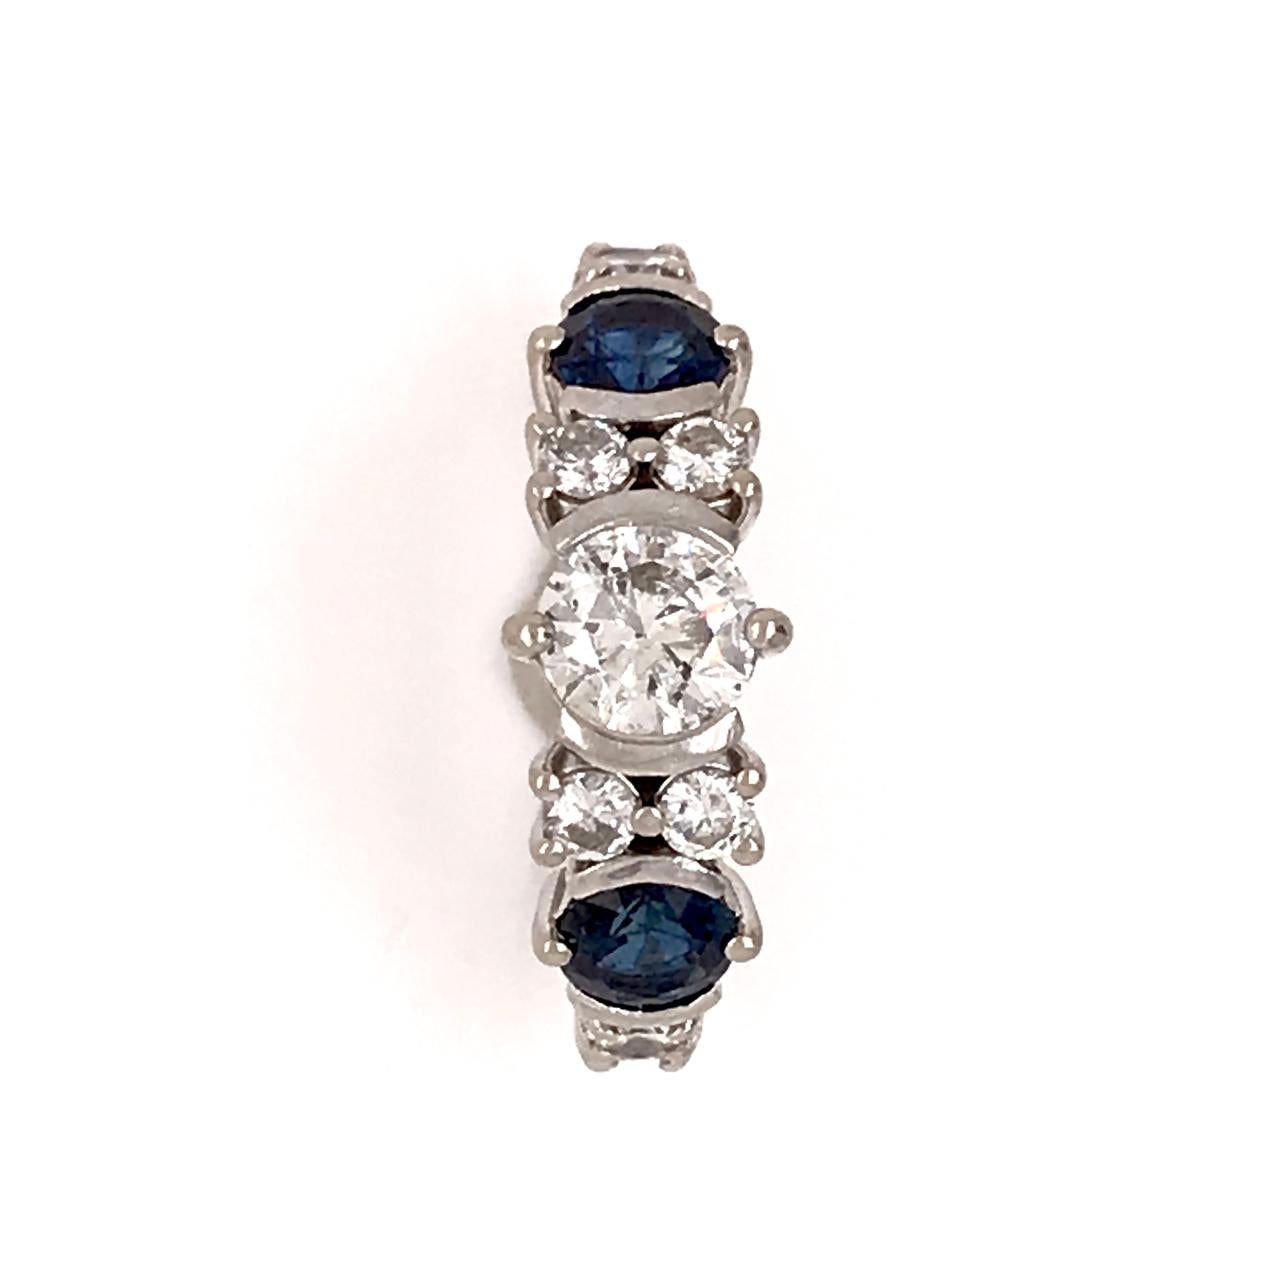 Vintage 14k White Gold, Diamond, & Sapphire Art Deco Style Cocktail Ring For Sale 7